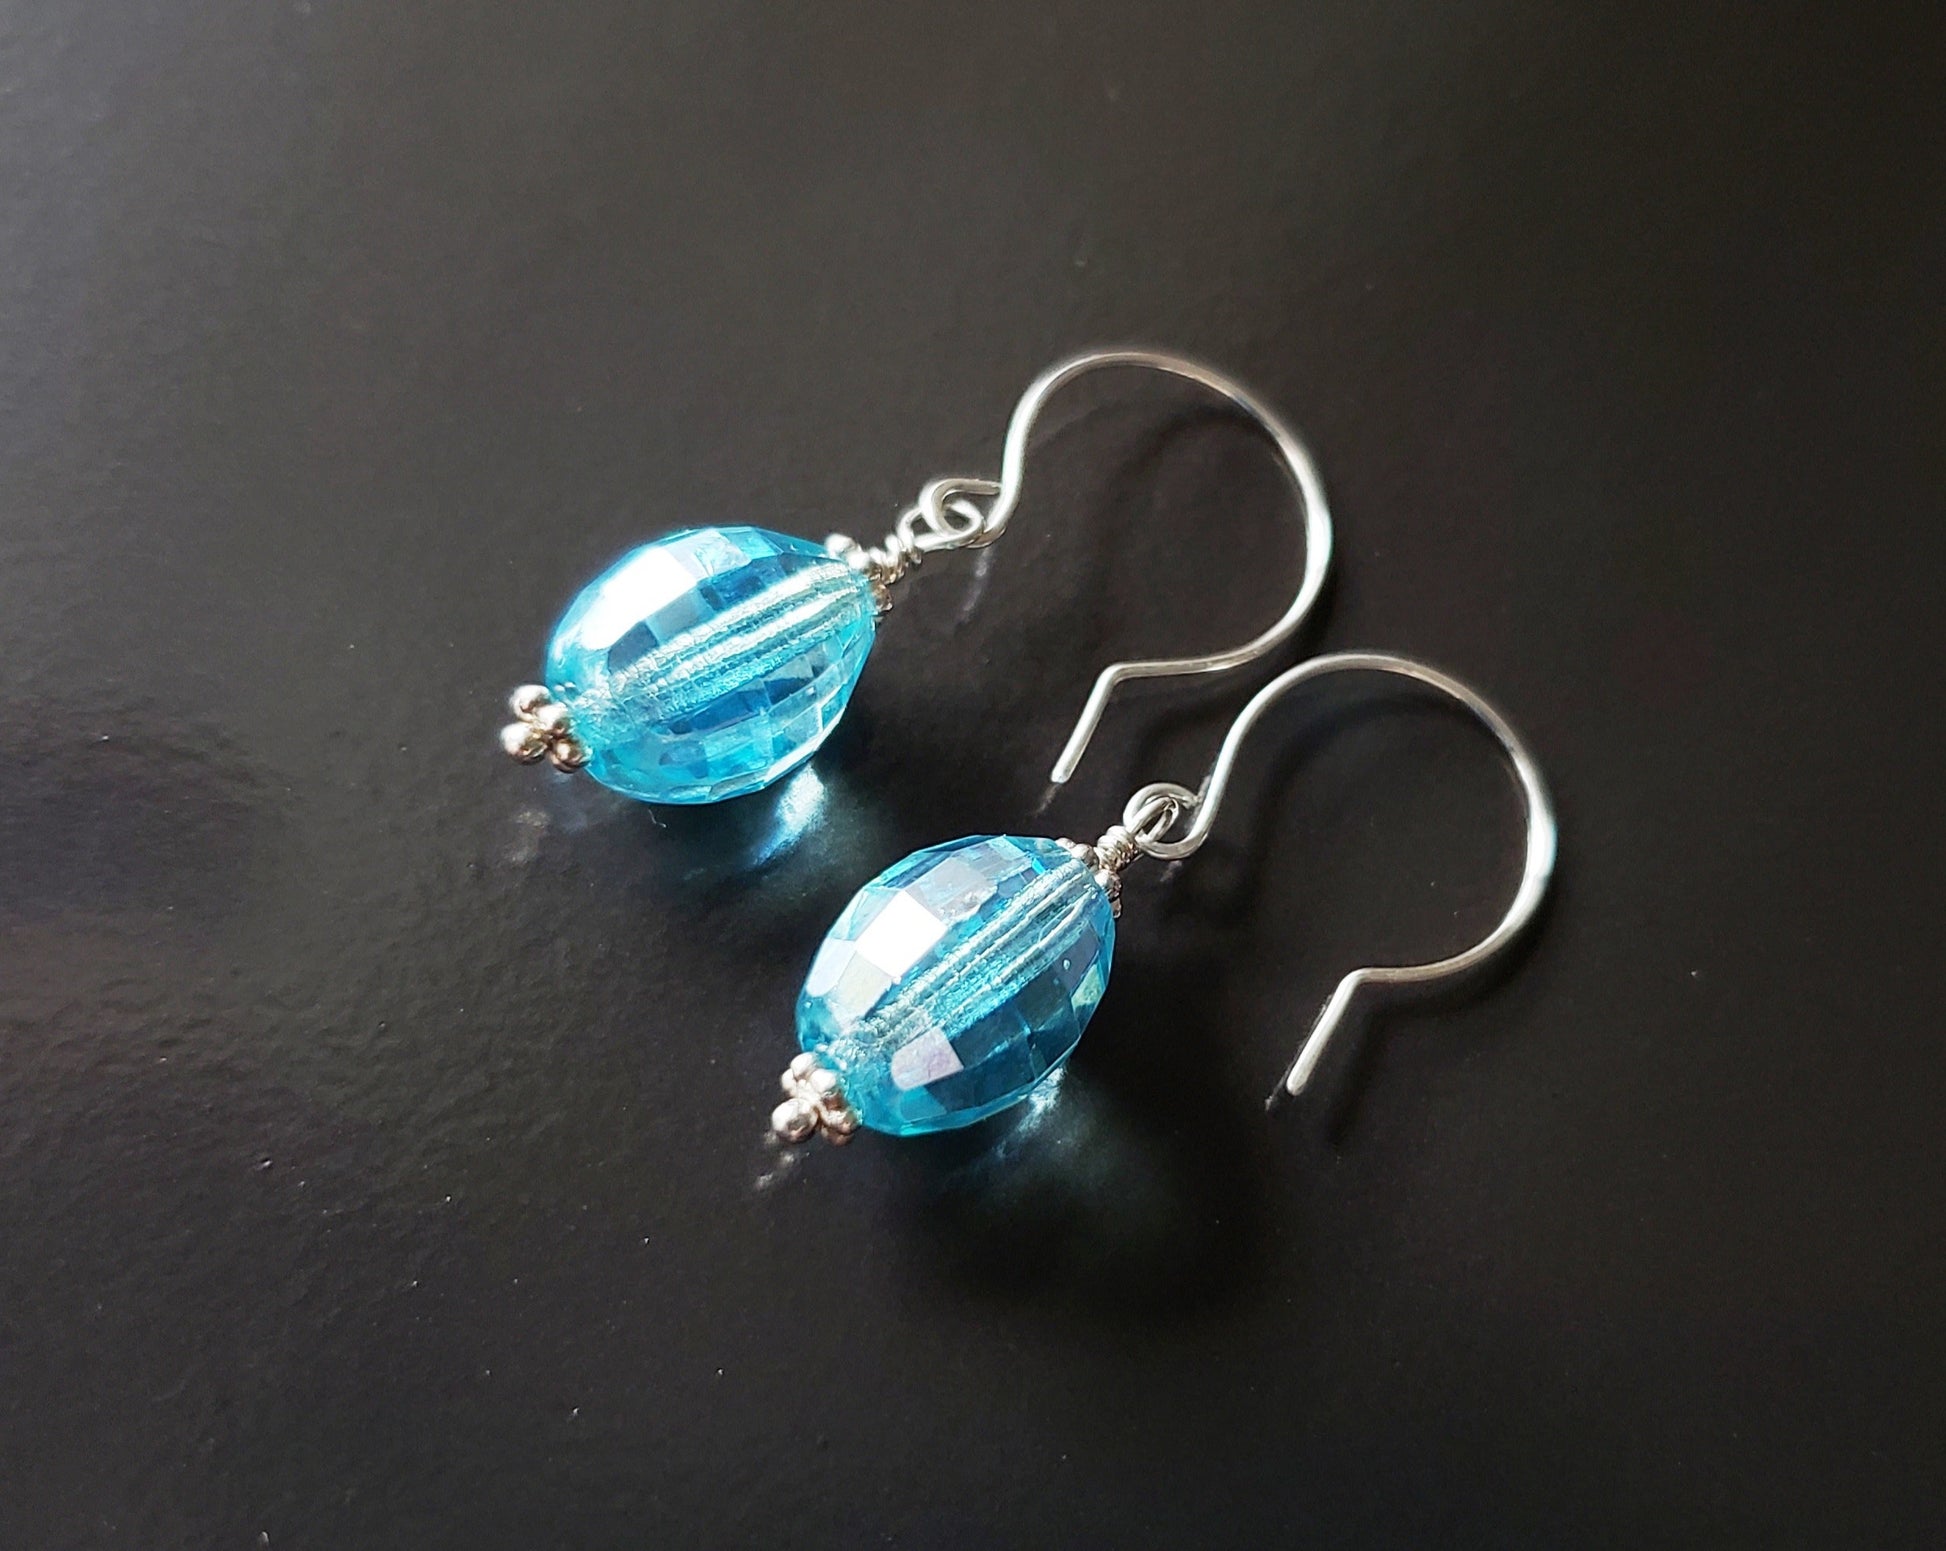 Brilliant Aqua Blue Crystal Drop Earrings made with solid Sterling Silver and sparkly oval shaped faceted aqua blue Vintage Crystal